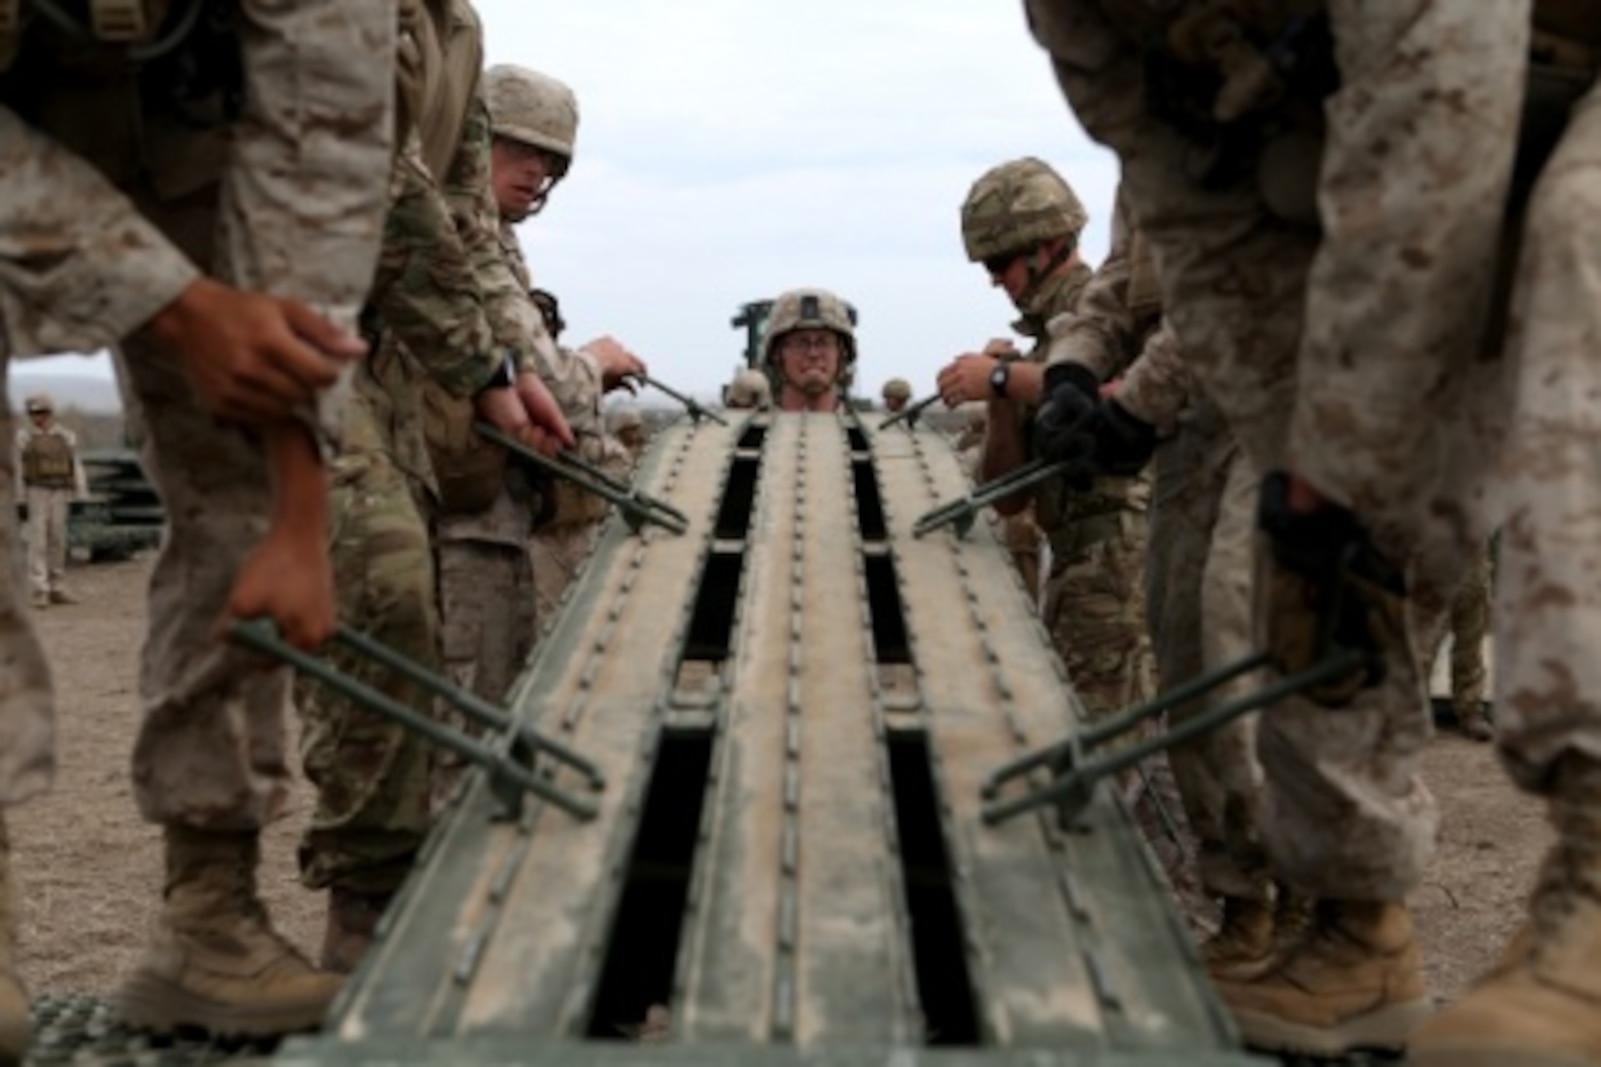 Engineers from Bridge Company, 7th Engineer Support Battalion, 1st Marine Logistics Group and 1st Combat Engineer Battalion, 1st Marine Division work with members of British 54 Commando Squadron Royal Engineers to place a ramp on a medium girder bridge aboard Camp Pendleton, Calif., Sept. 21, 2015. Marines from 7th ESB and 1st CEB are conducting various engineer training events alongside their British counterparts in coming weeks as part of annual large-scale exercise Black Alligator.